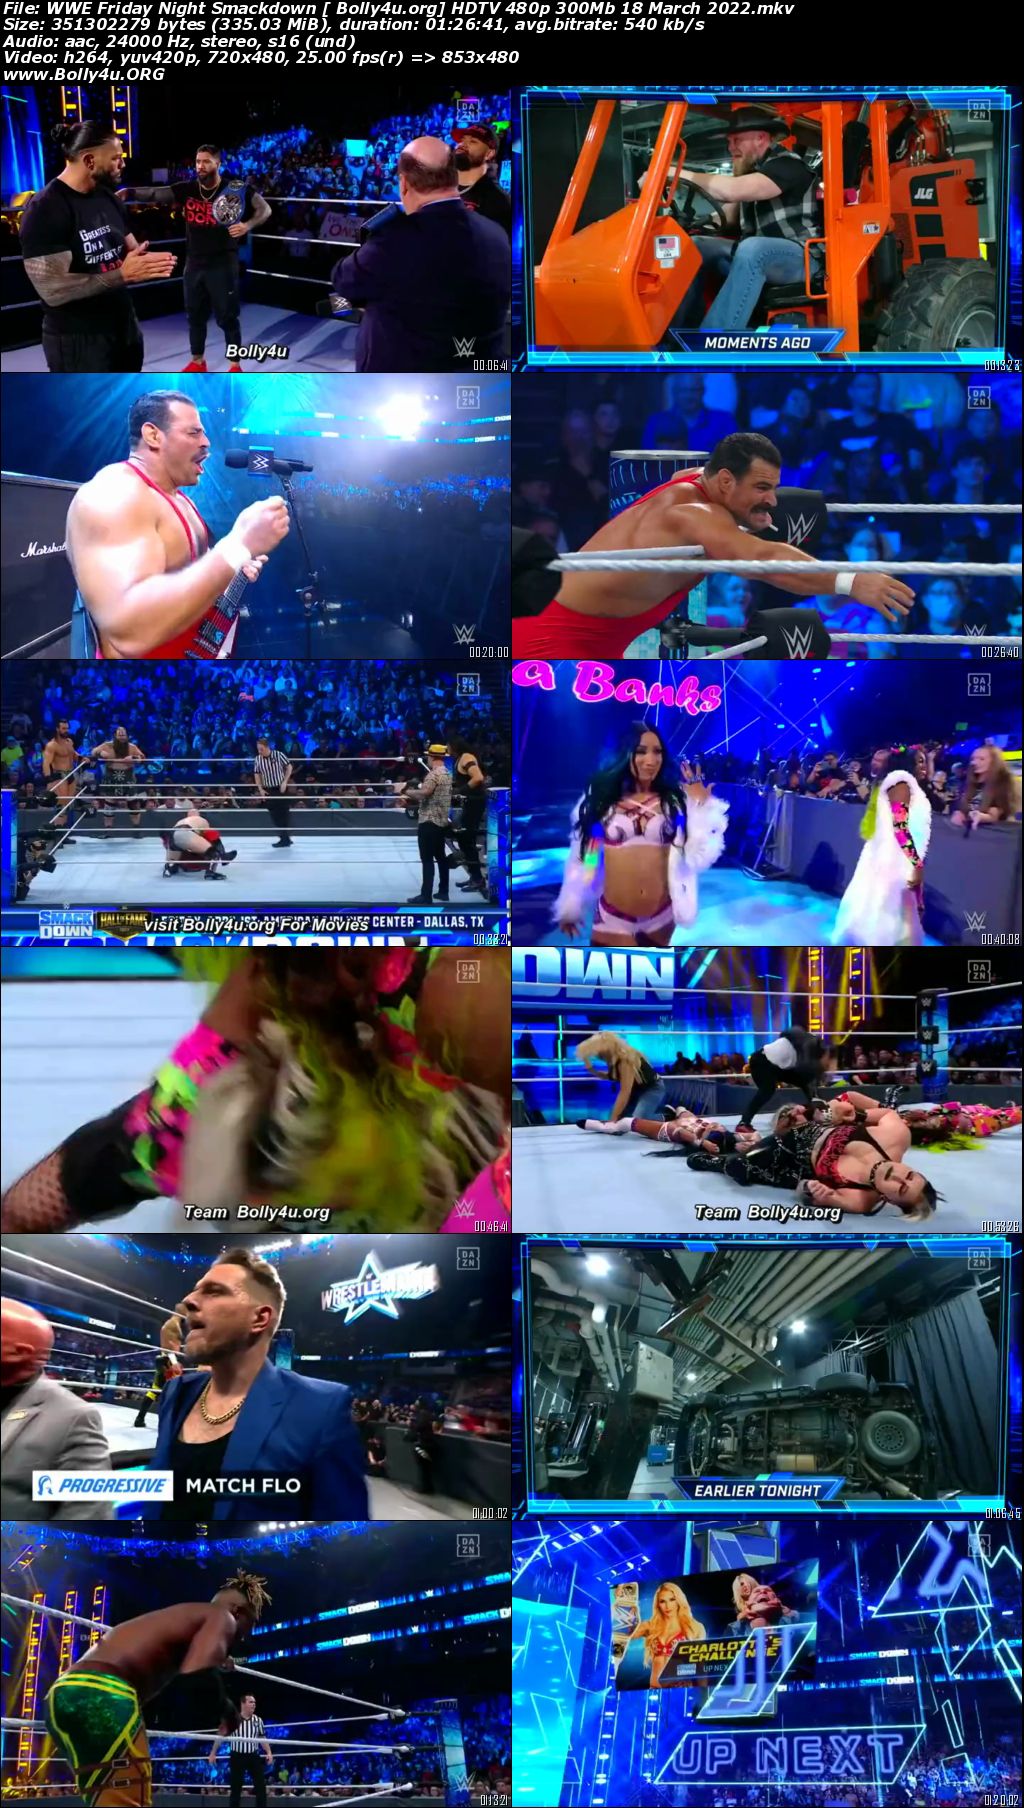 WWE Friday Night Smackdown HDTV 480p 300Mb 18 March 2022 Download